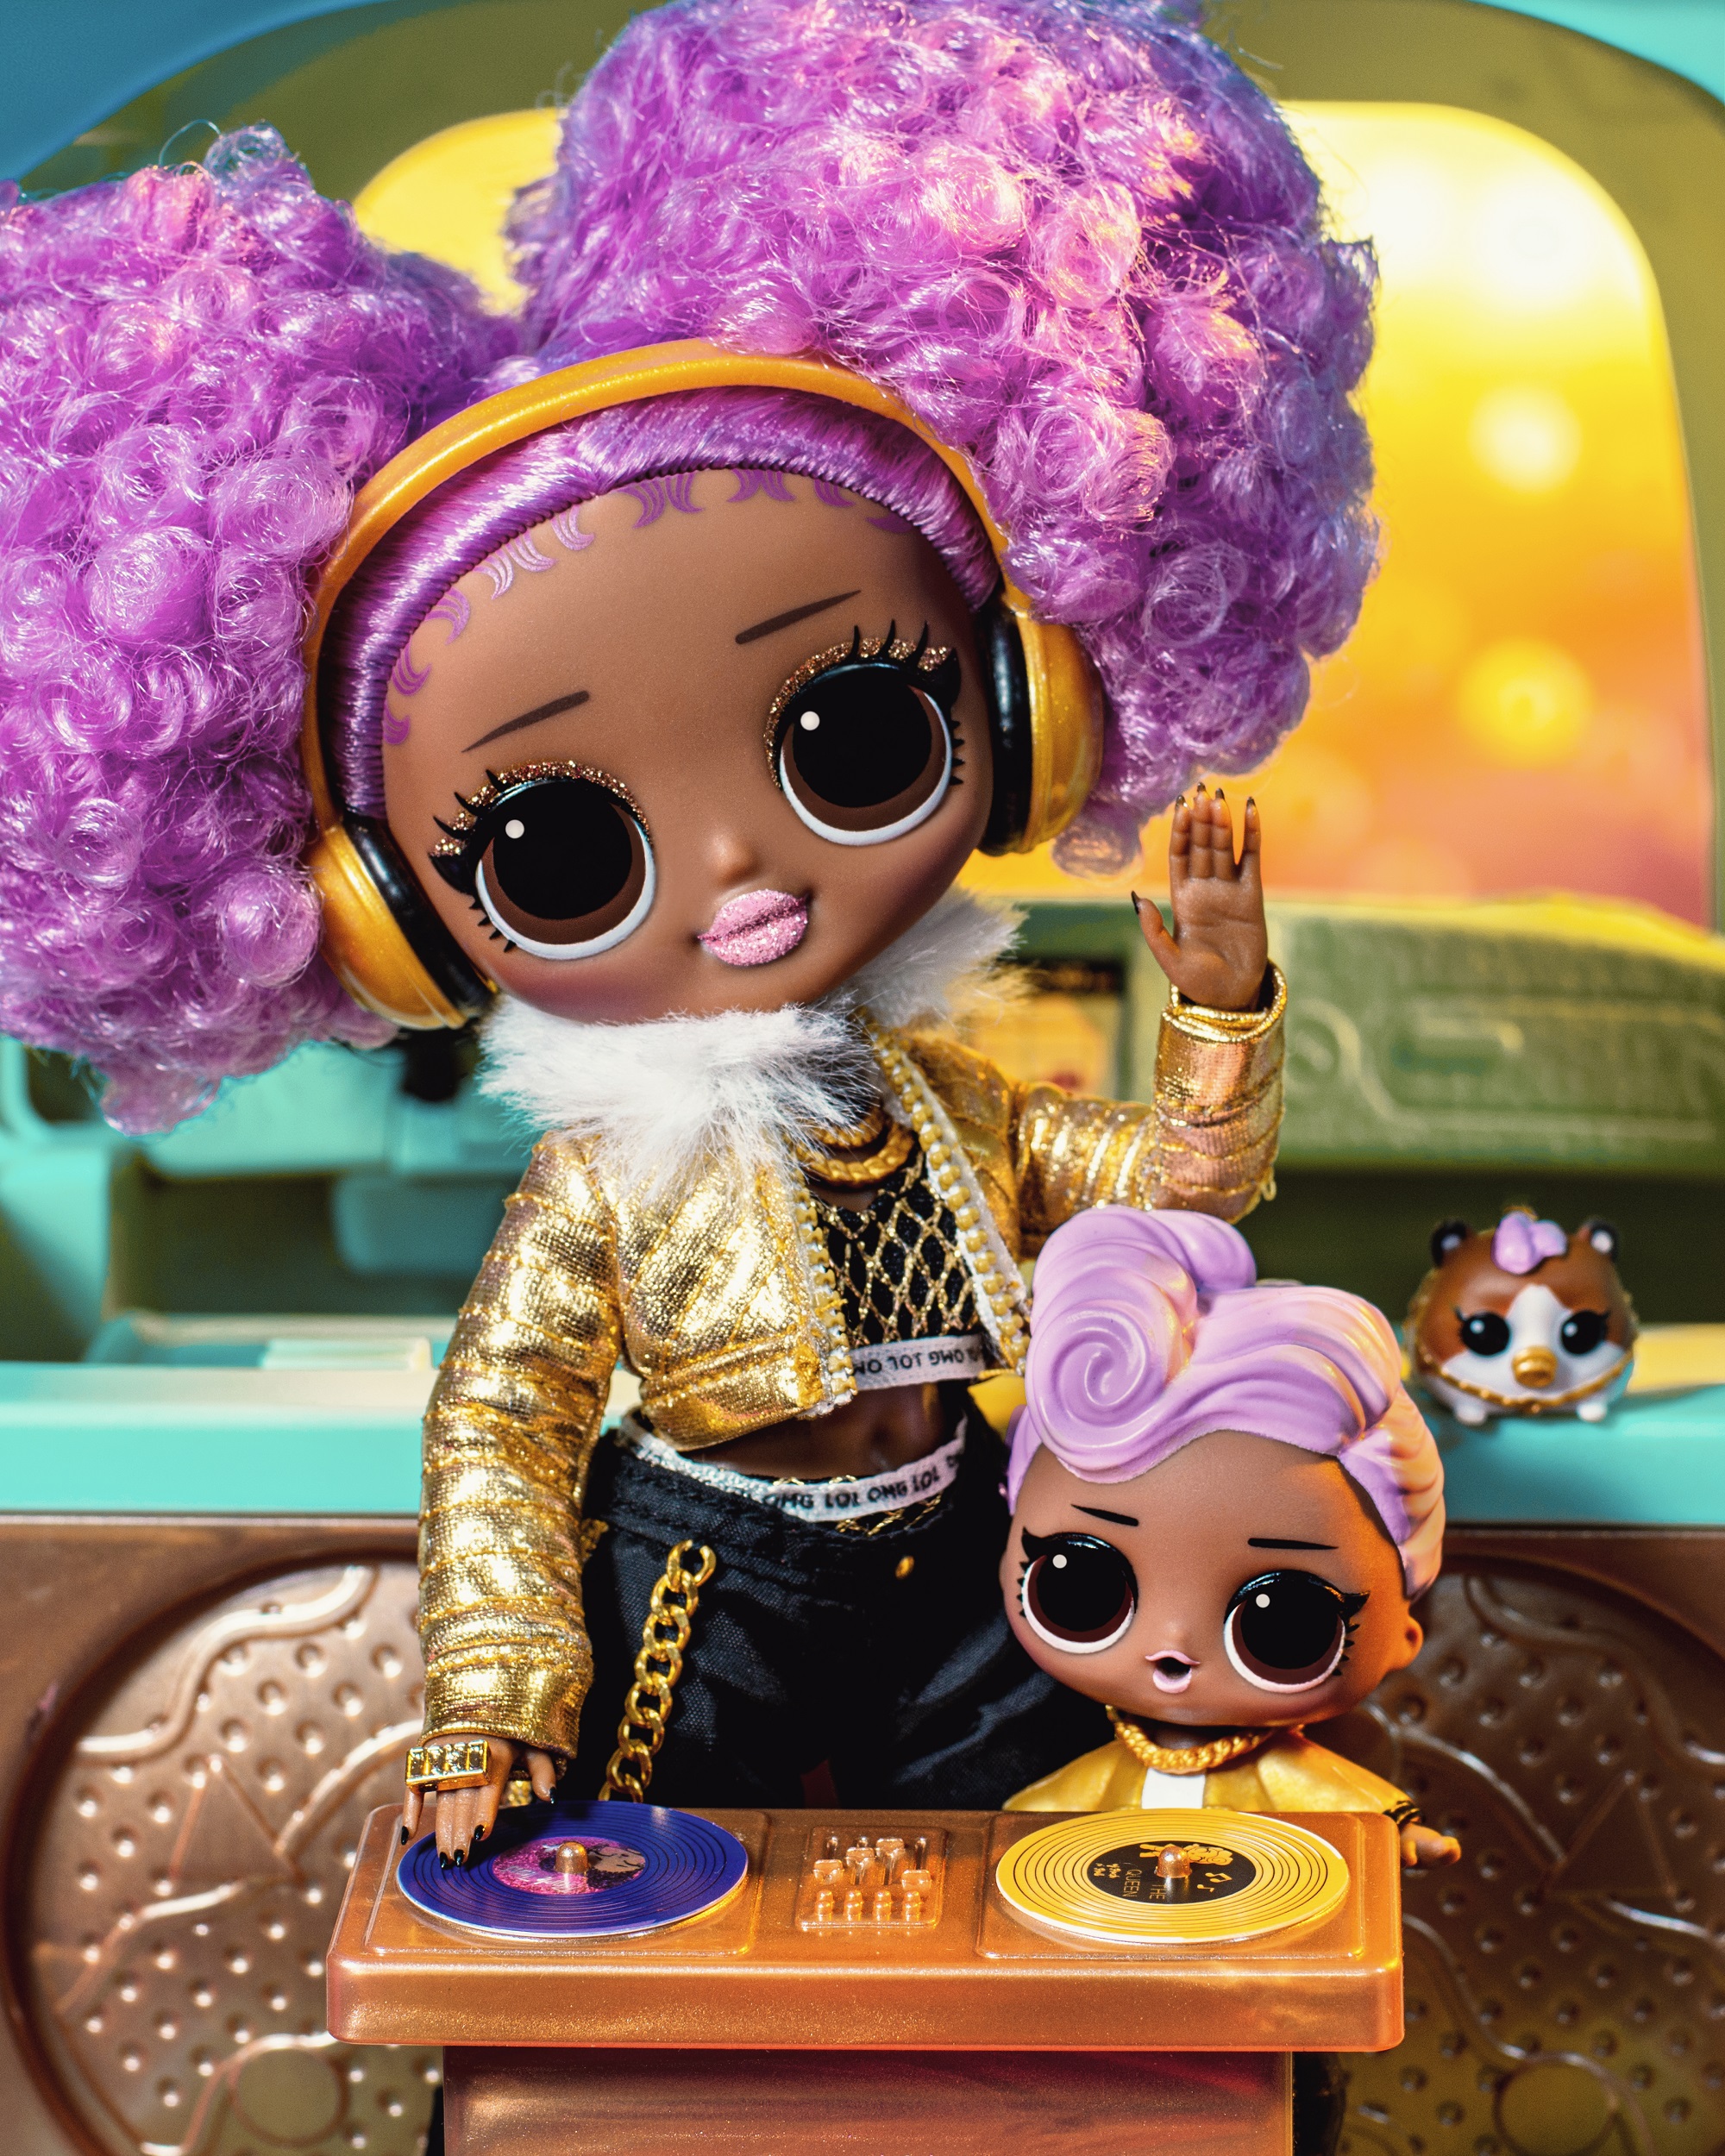 LOL Surprise Omg 24K D.J. Fashion Doll Playset, 20 Pieces, Great Gift for Kids Ages 4 5 6+ - image 3 of 3